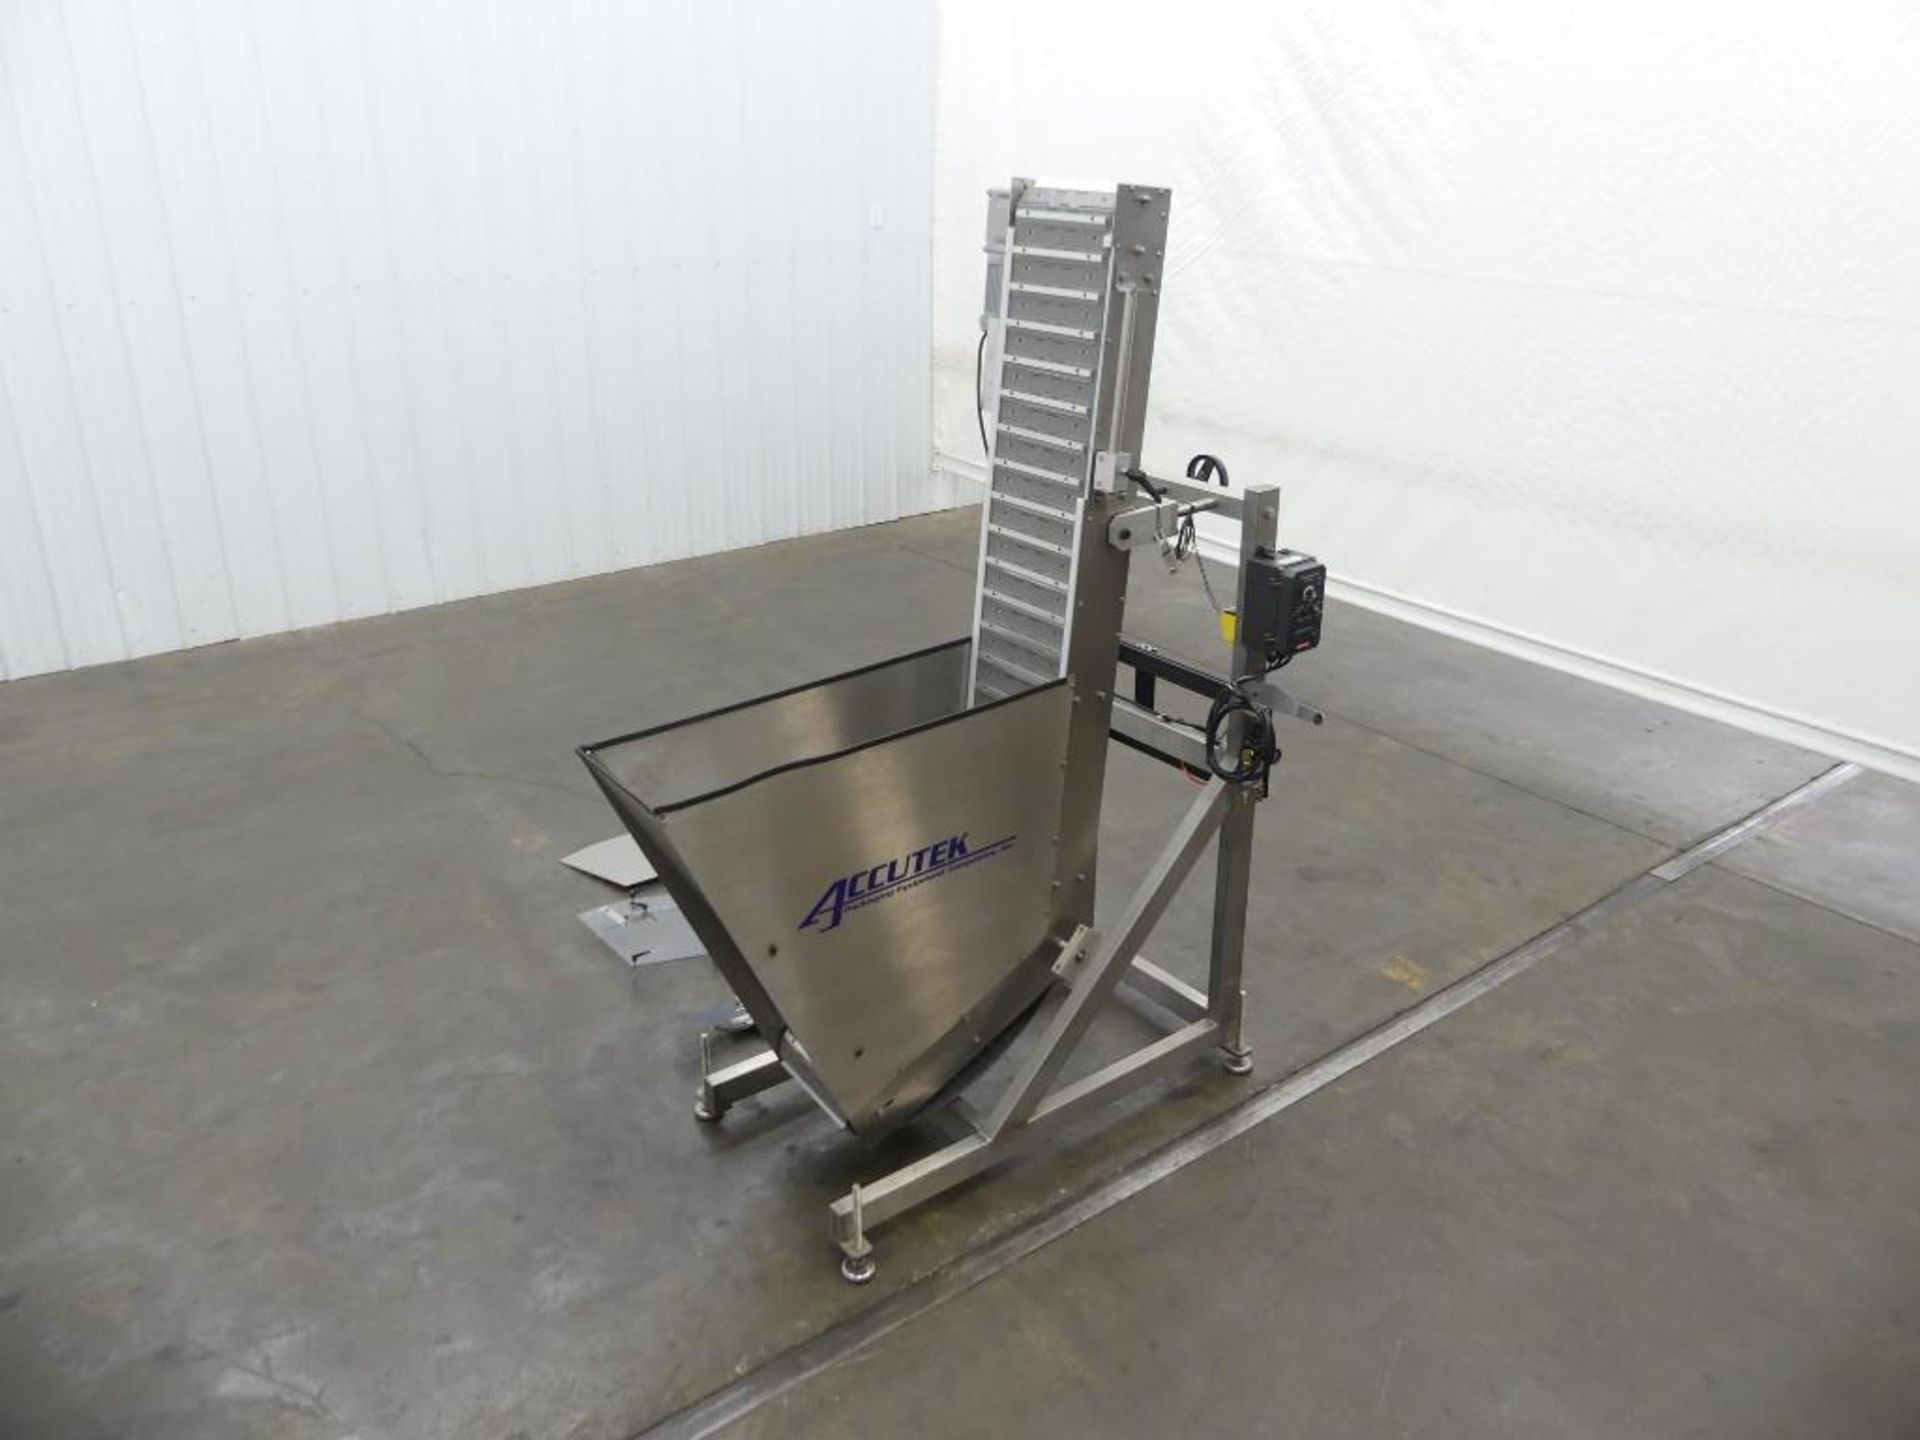 2019 AccuTek Packaging Equipment Co. 50-C0E-CH2 Stainless Steel Cap Loader Elevator - Image 2 of 25